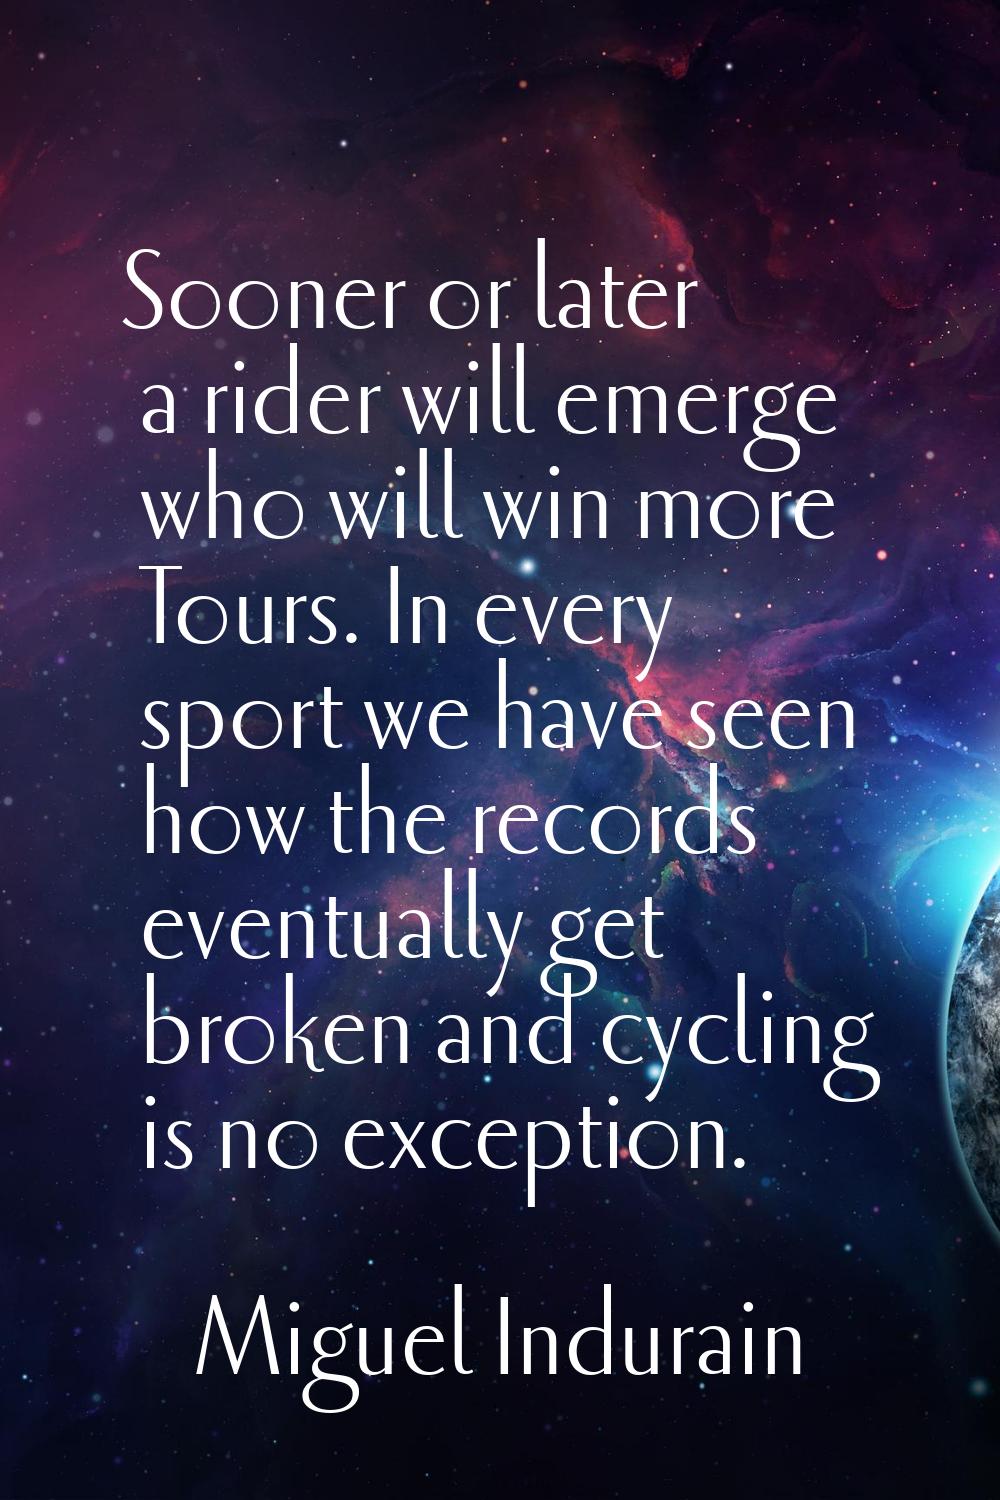 Sooner or later a rider will emerge who will win more Tours. In every sport we have seen how the re